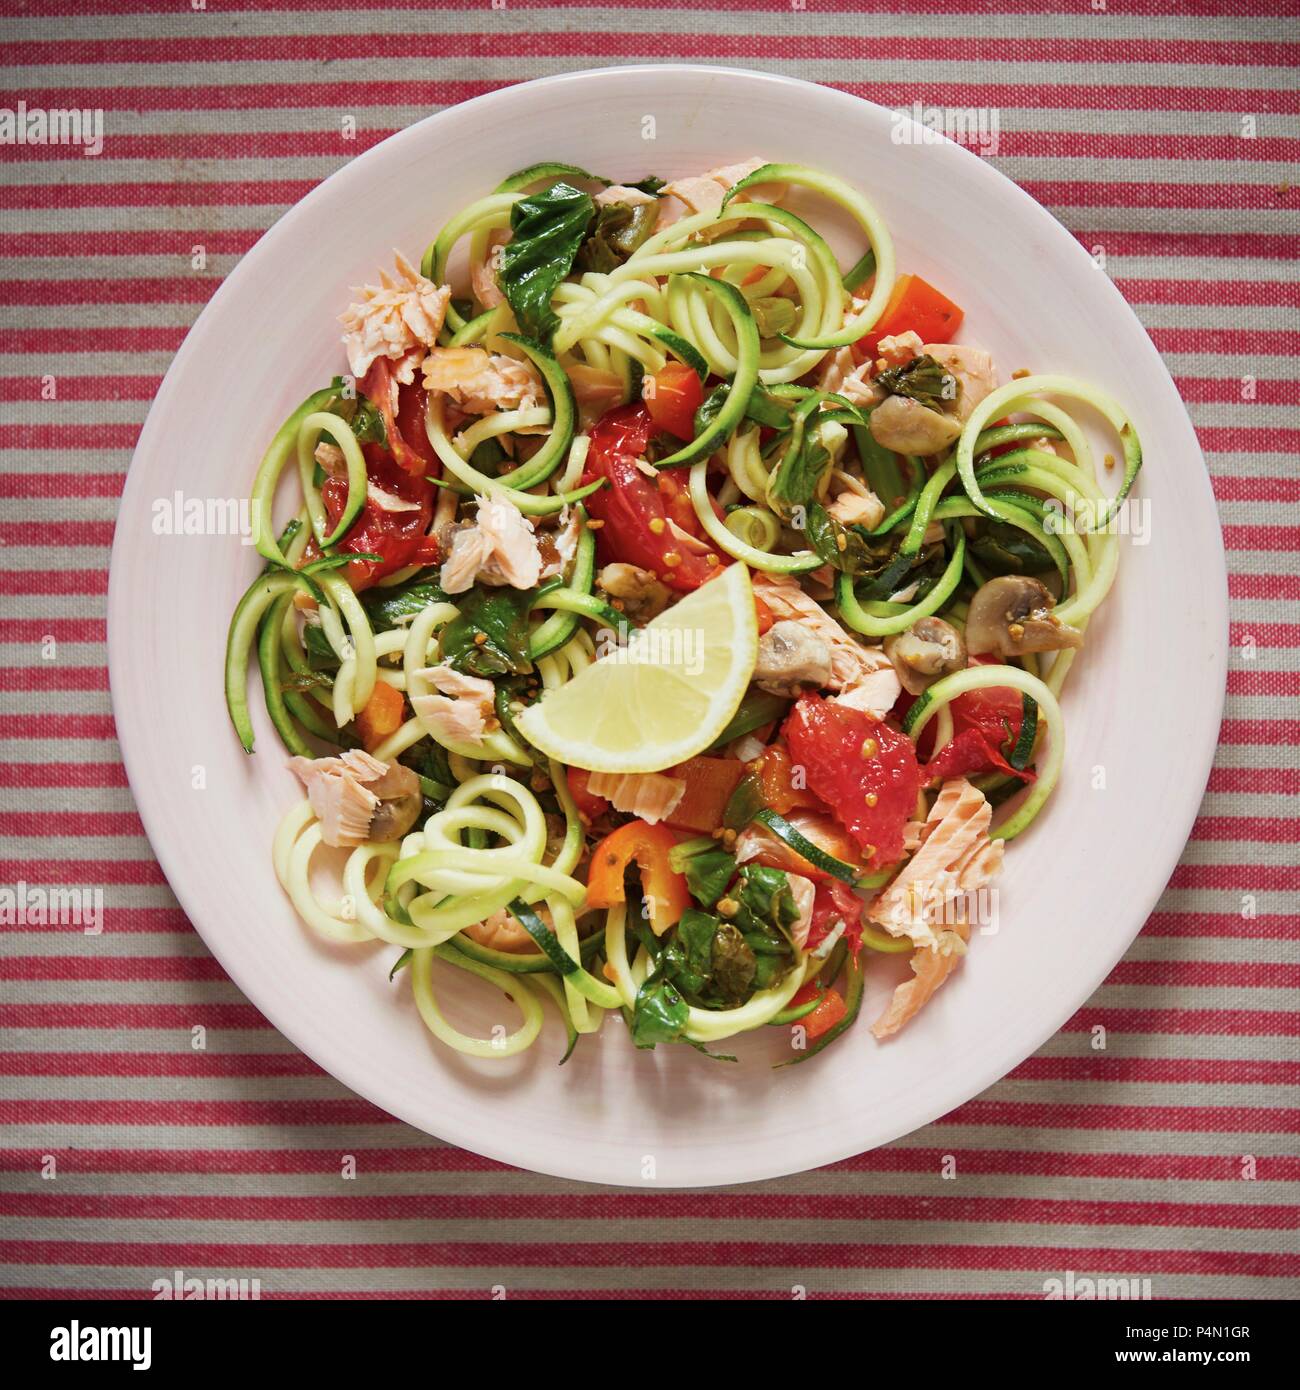 Courgette pasta with salmon Stock Photo